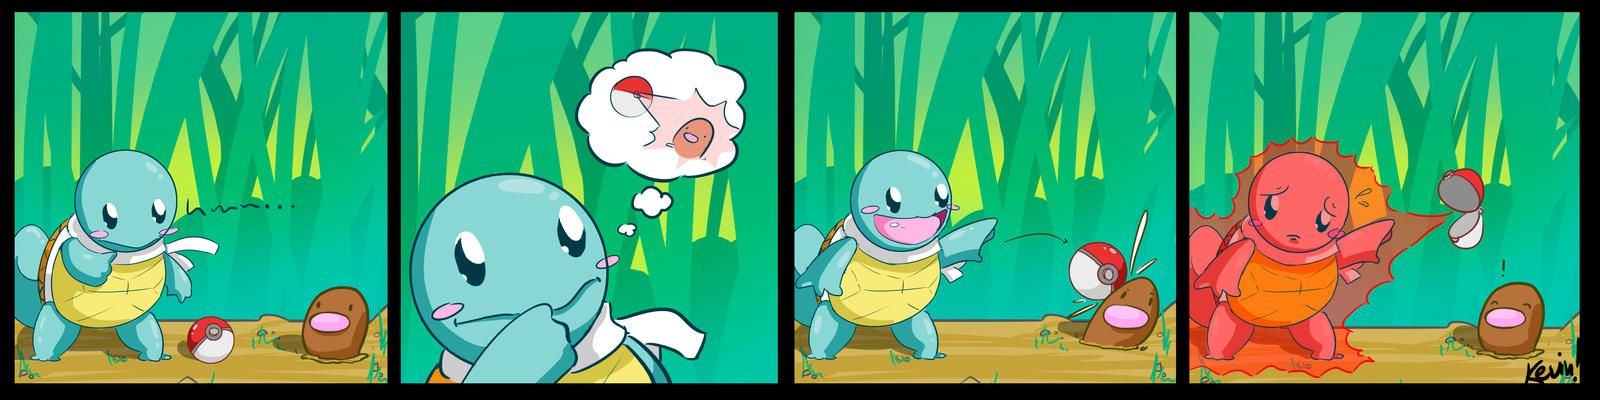 squirtle__not_exactly_as_planned_by_shib